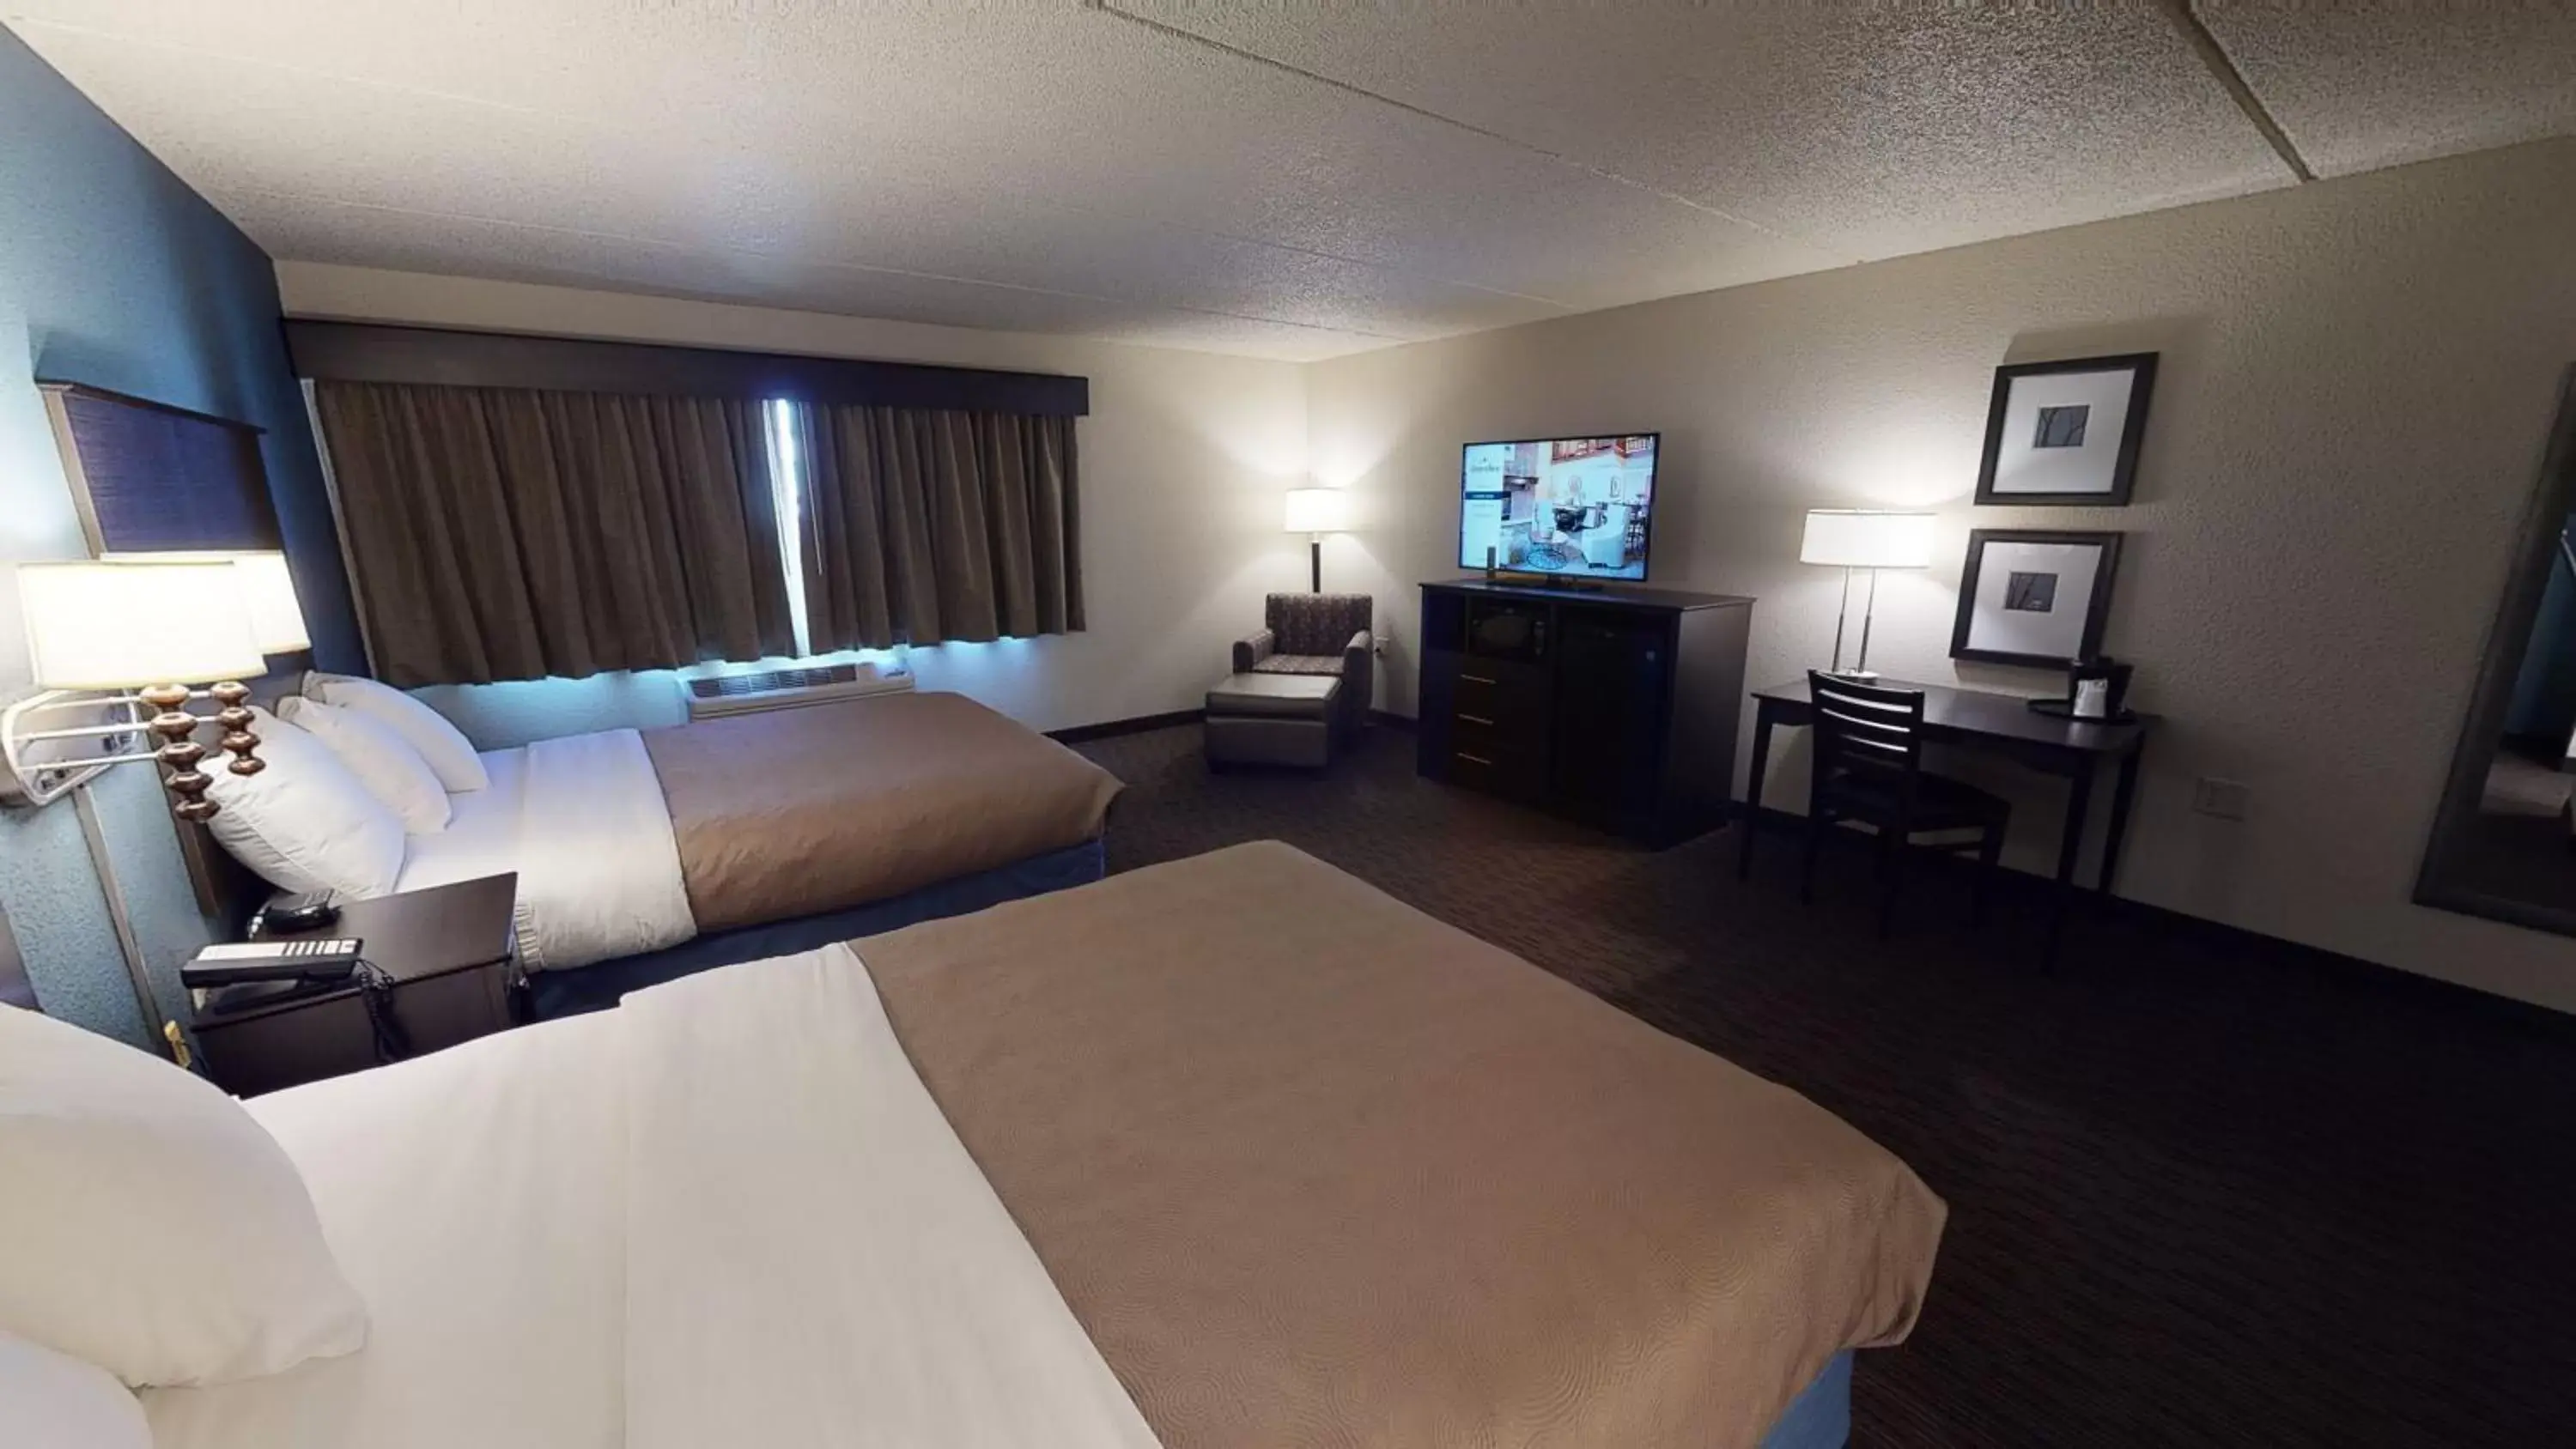 Breakfast, Bed in AmericInn by Wyndham Mounds View Minneapolis